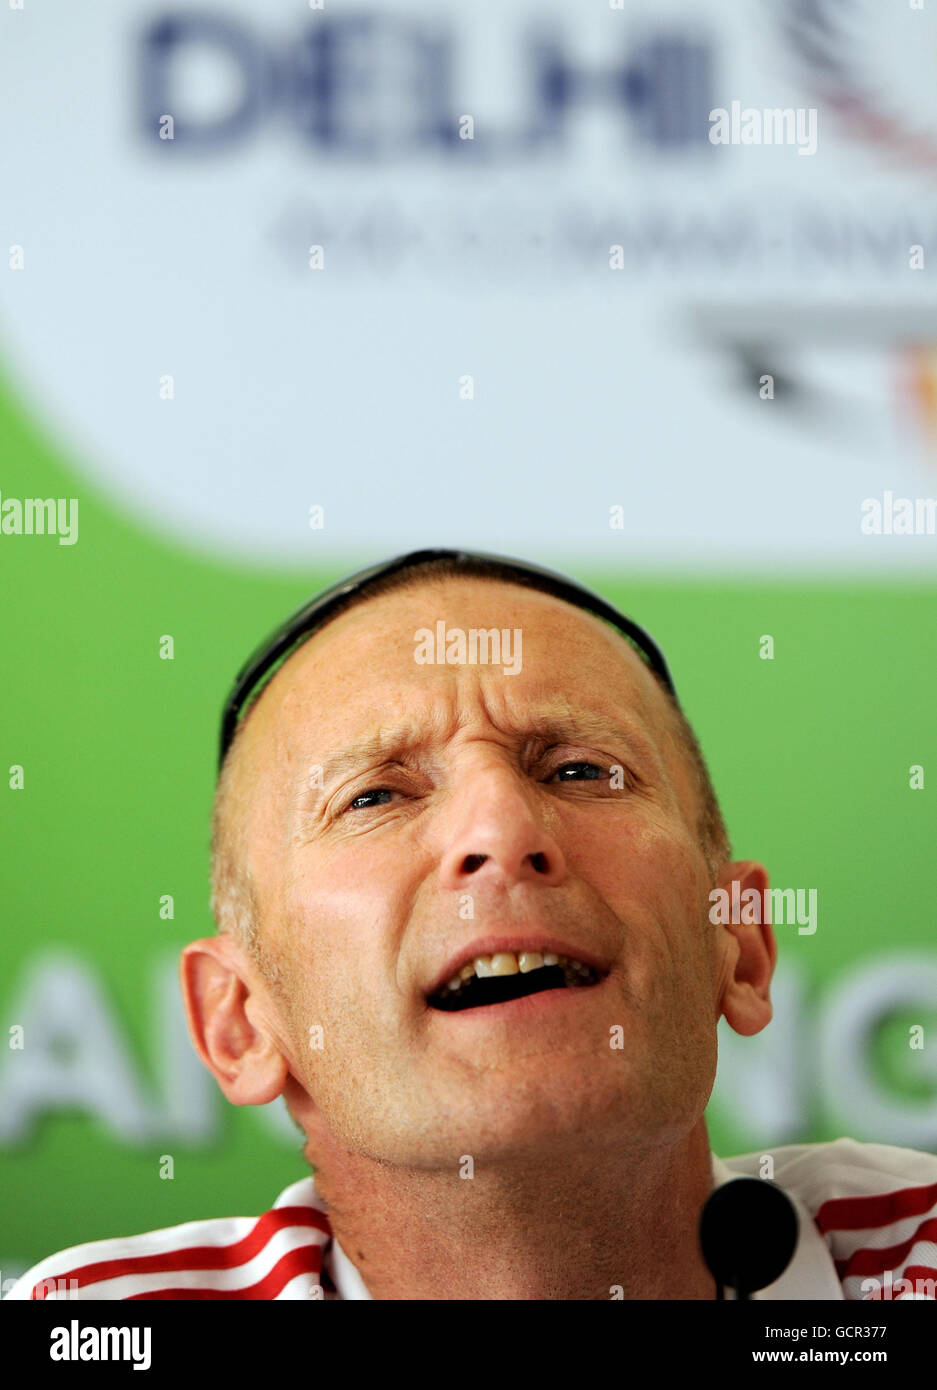 England's Chef De Mission speaks during a press conference at the Athletes Village in Delhi, India. Stock Photo